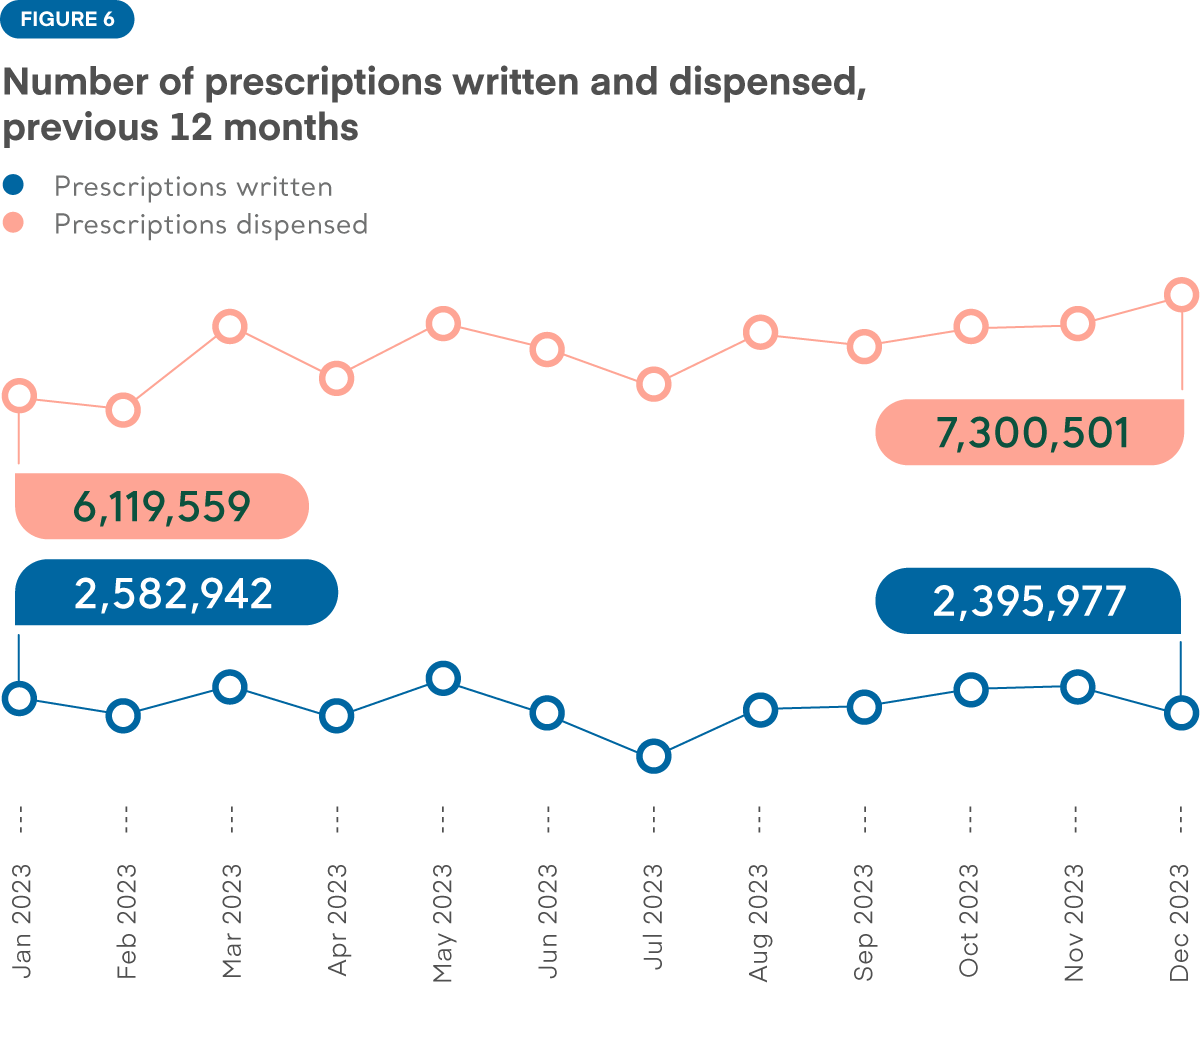 Figure 6. The number of written prescriptions and times the prescriptions were used fluctuates by month. Pharmacies sold the most prescription medicines in March and December and the least in April and July.